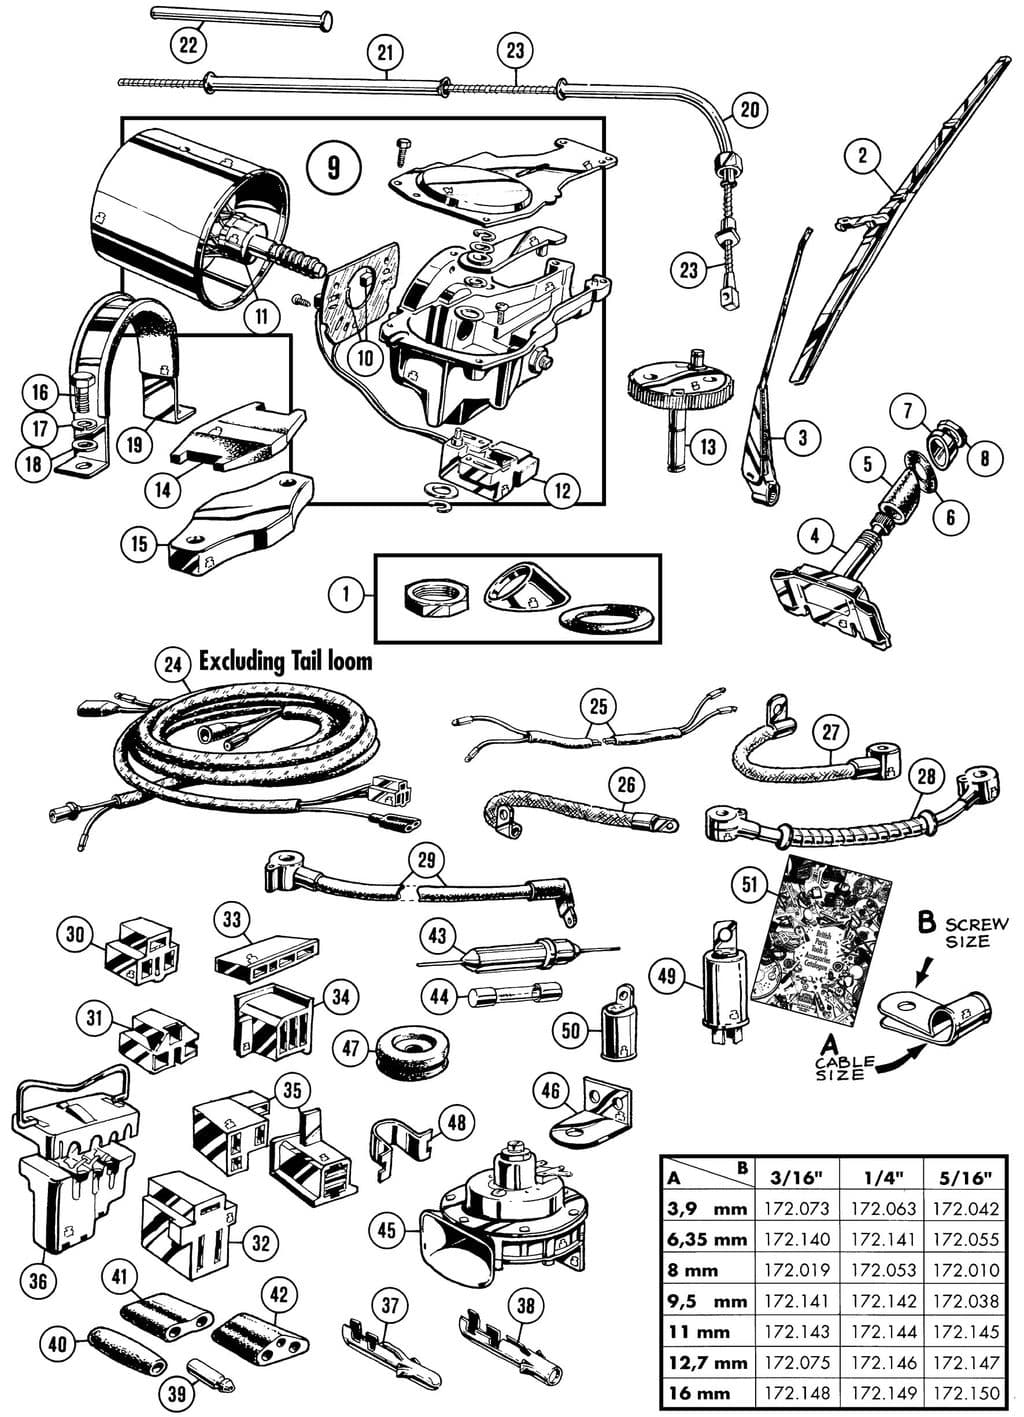 MGC 1967-1969 - Fuses & fuse boxes | Webshop Anglo Parts - Wiper motor & wiring - 1